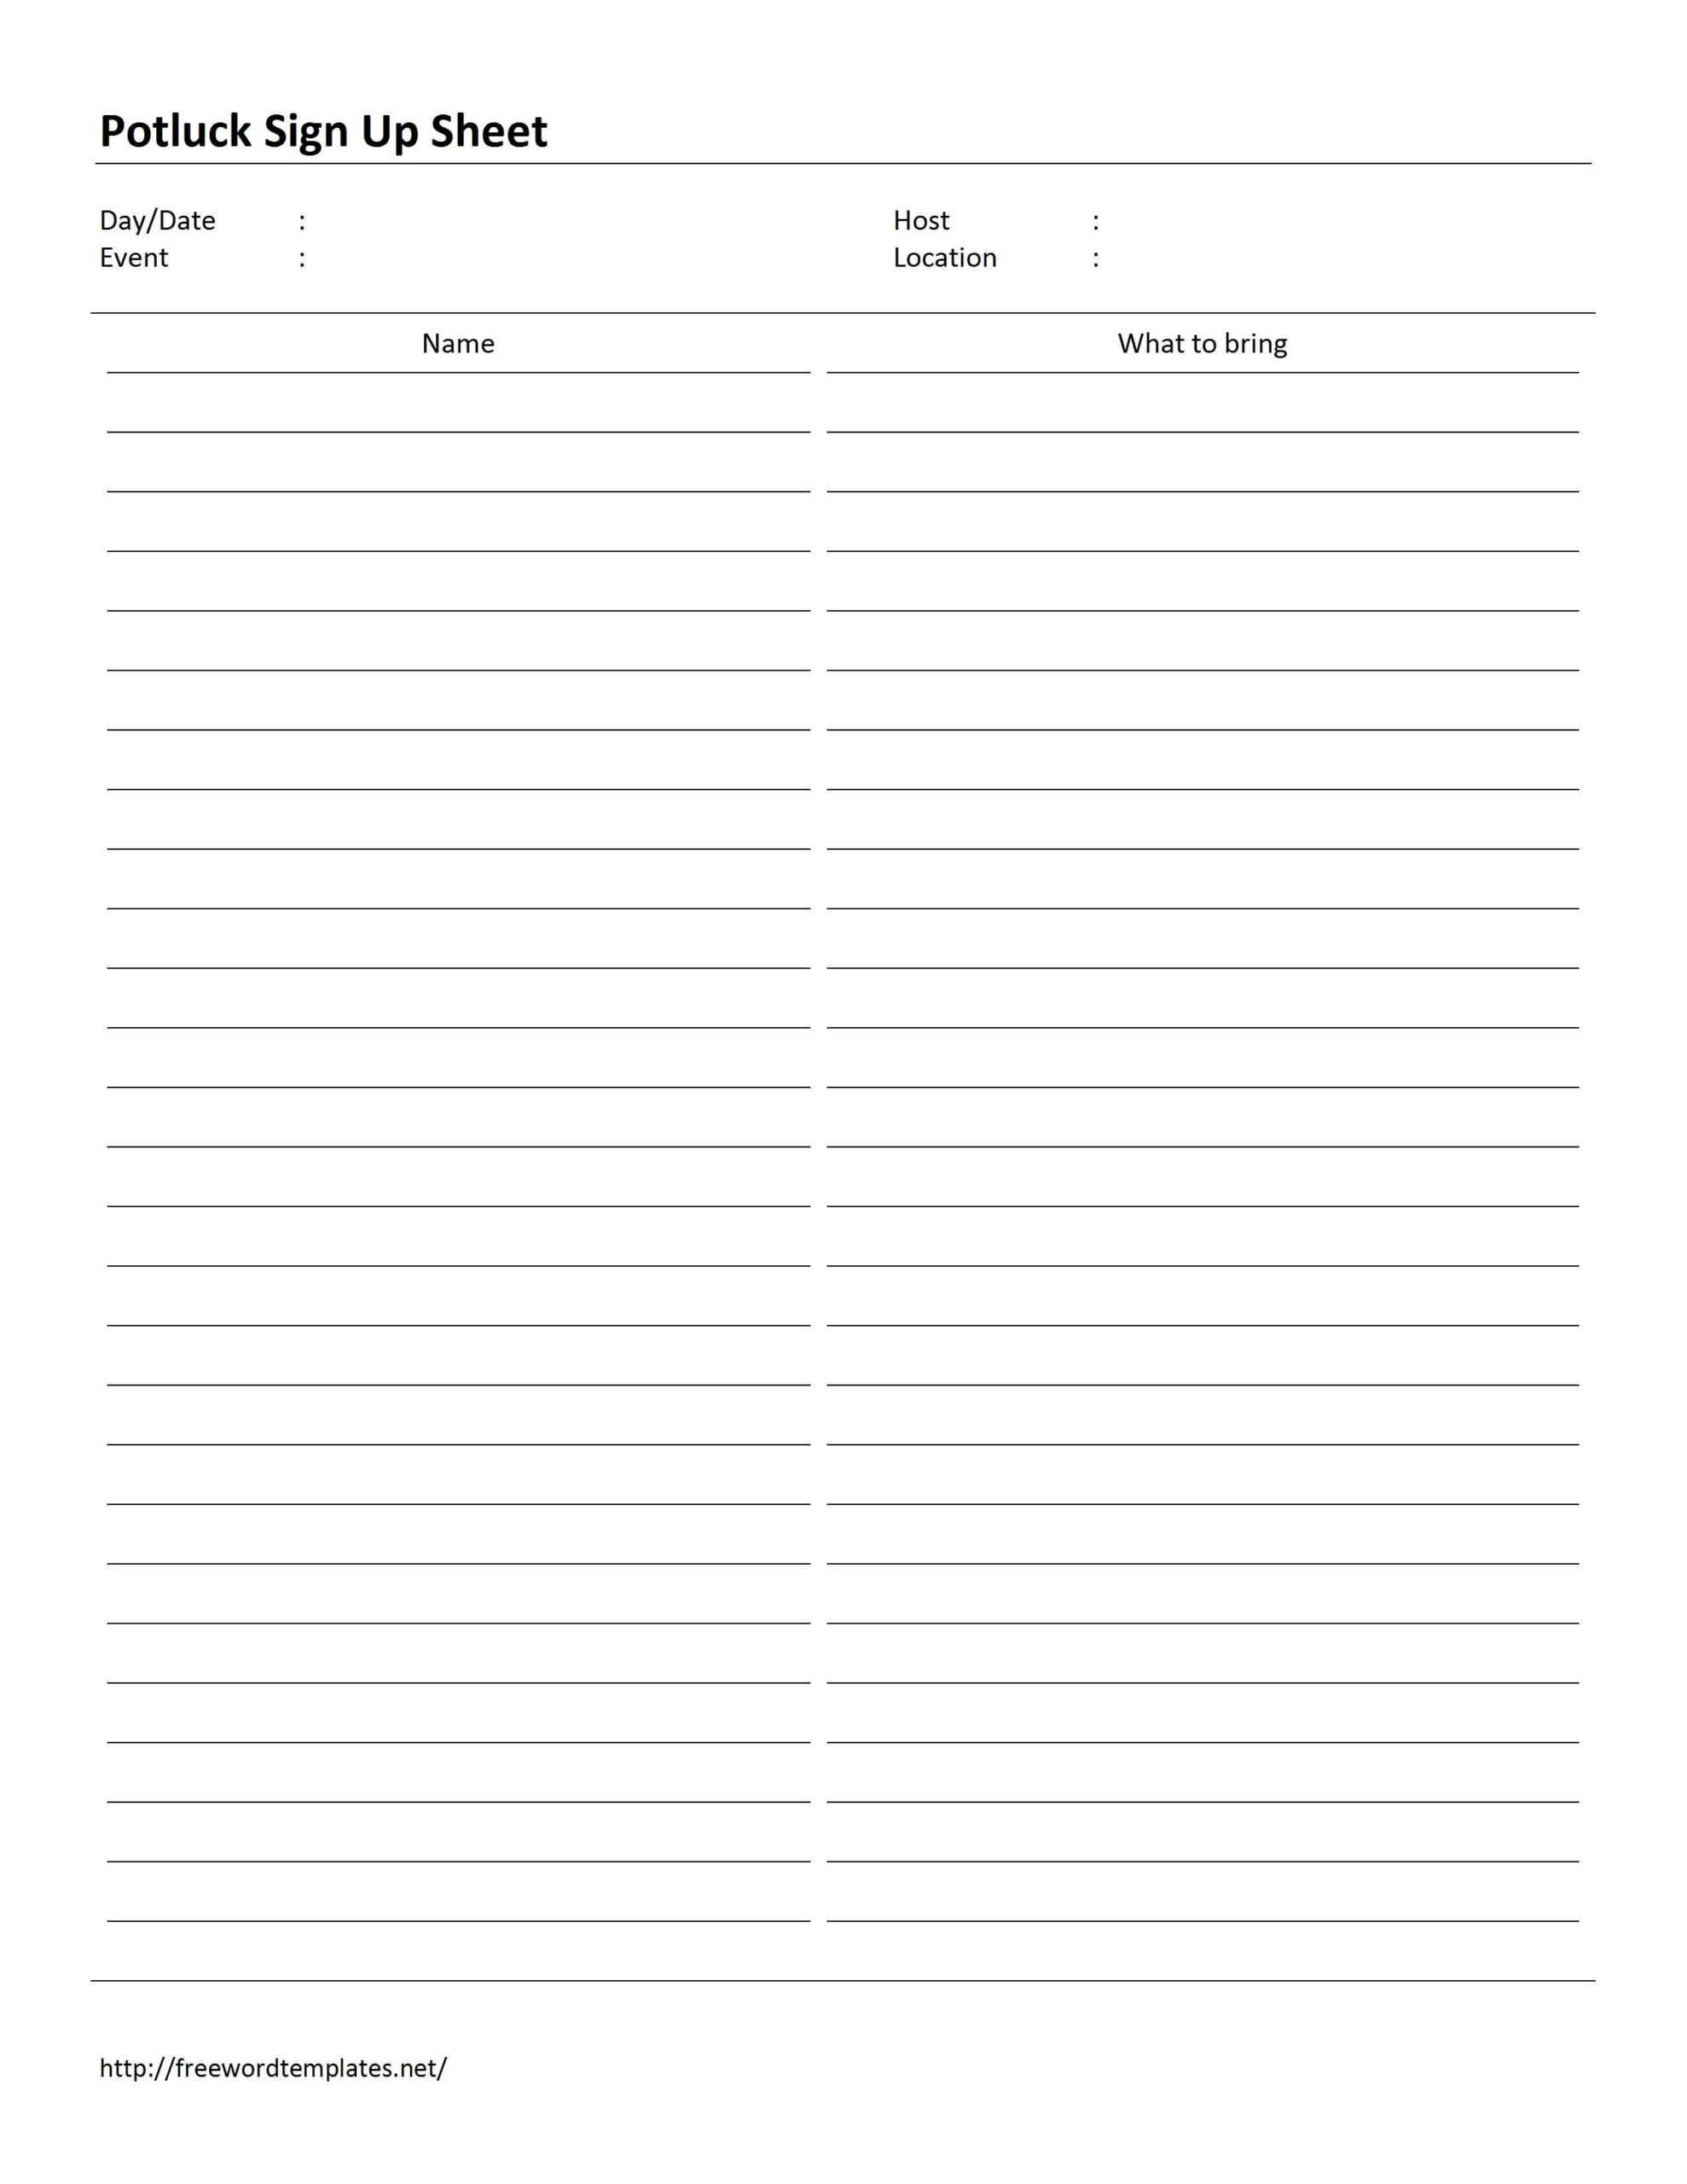 Potluck Sign Up Sheet Template Throughout Free Sign Up Sheet Template Word